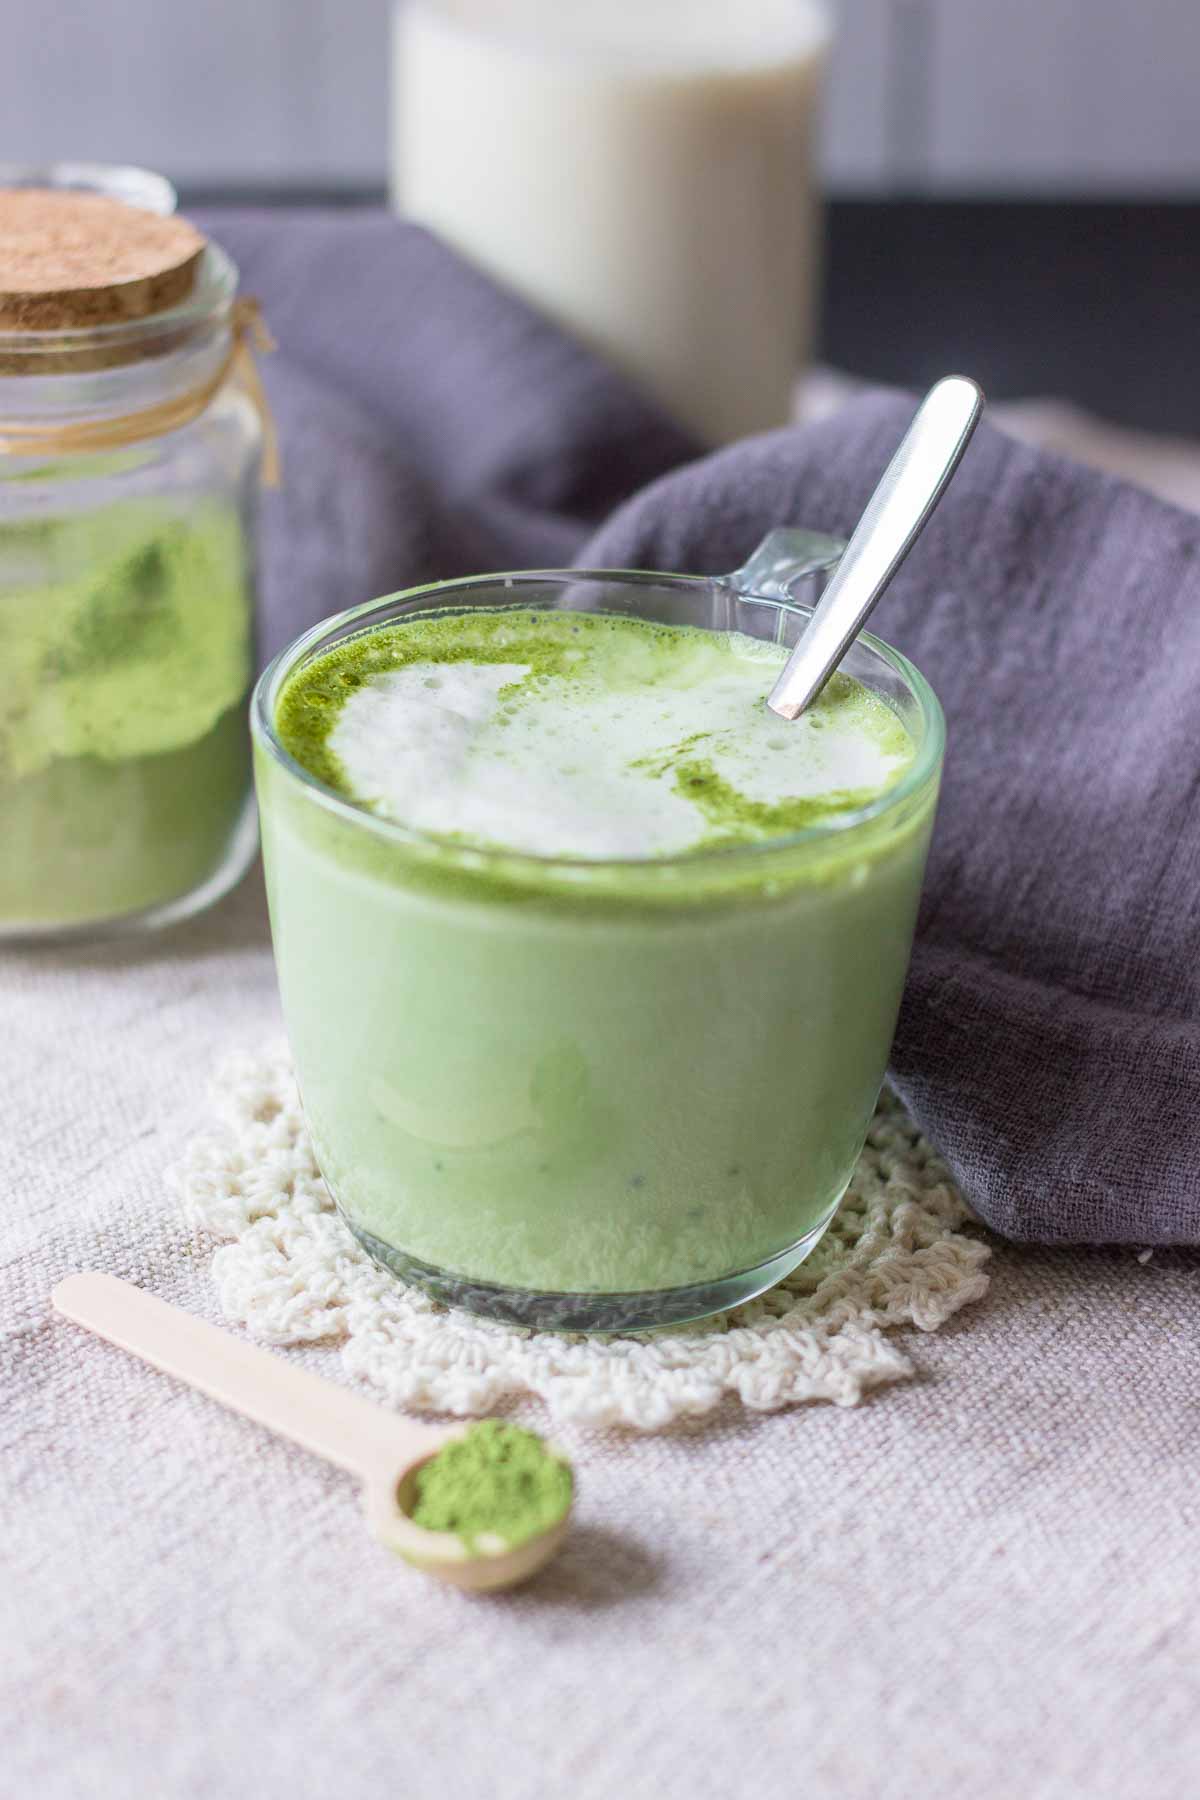 Matcha latte served in a mug with a spoon